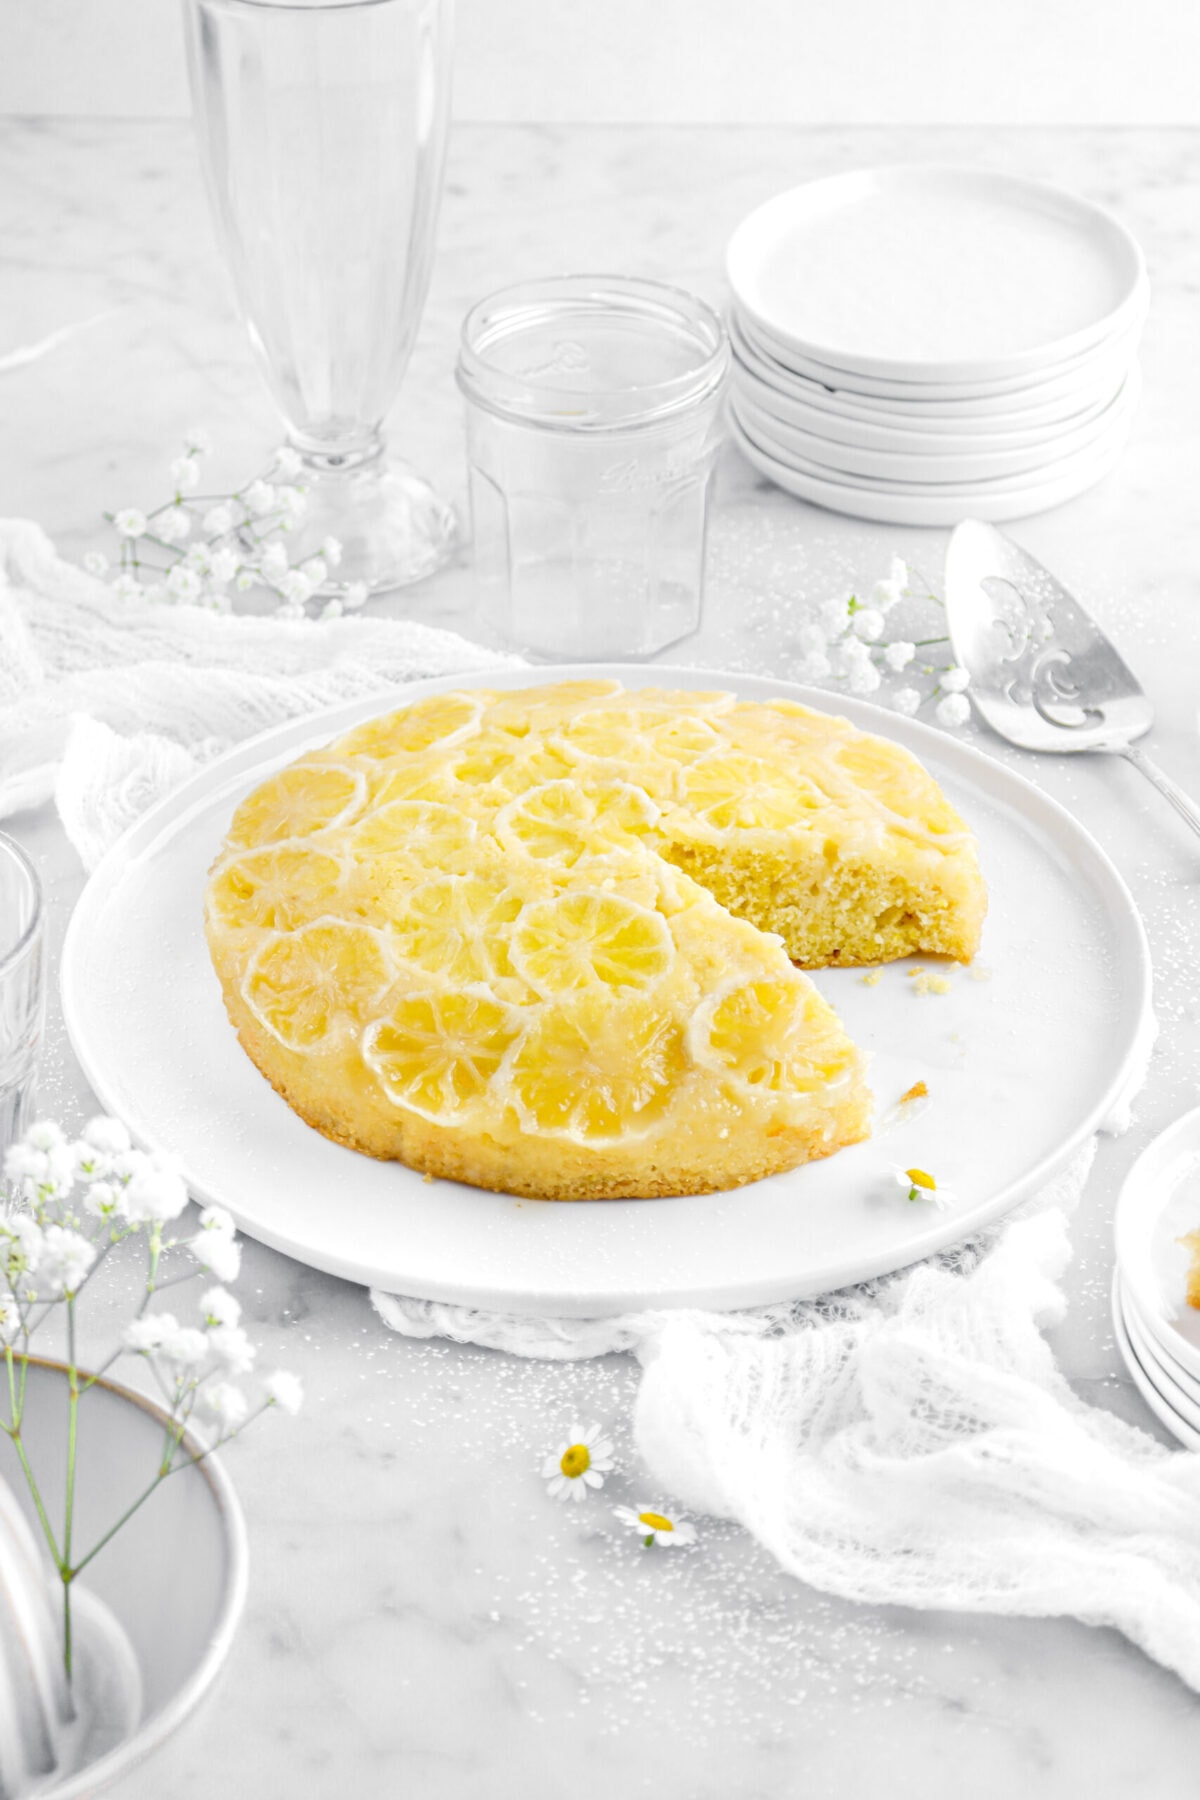 front shot of lemon upside down cake with slice missing with stack of plates and empty glasses behind with flowers around on marble surface.